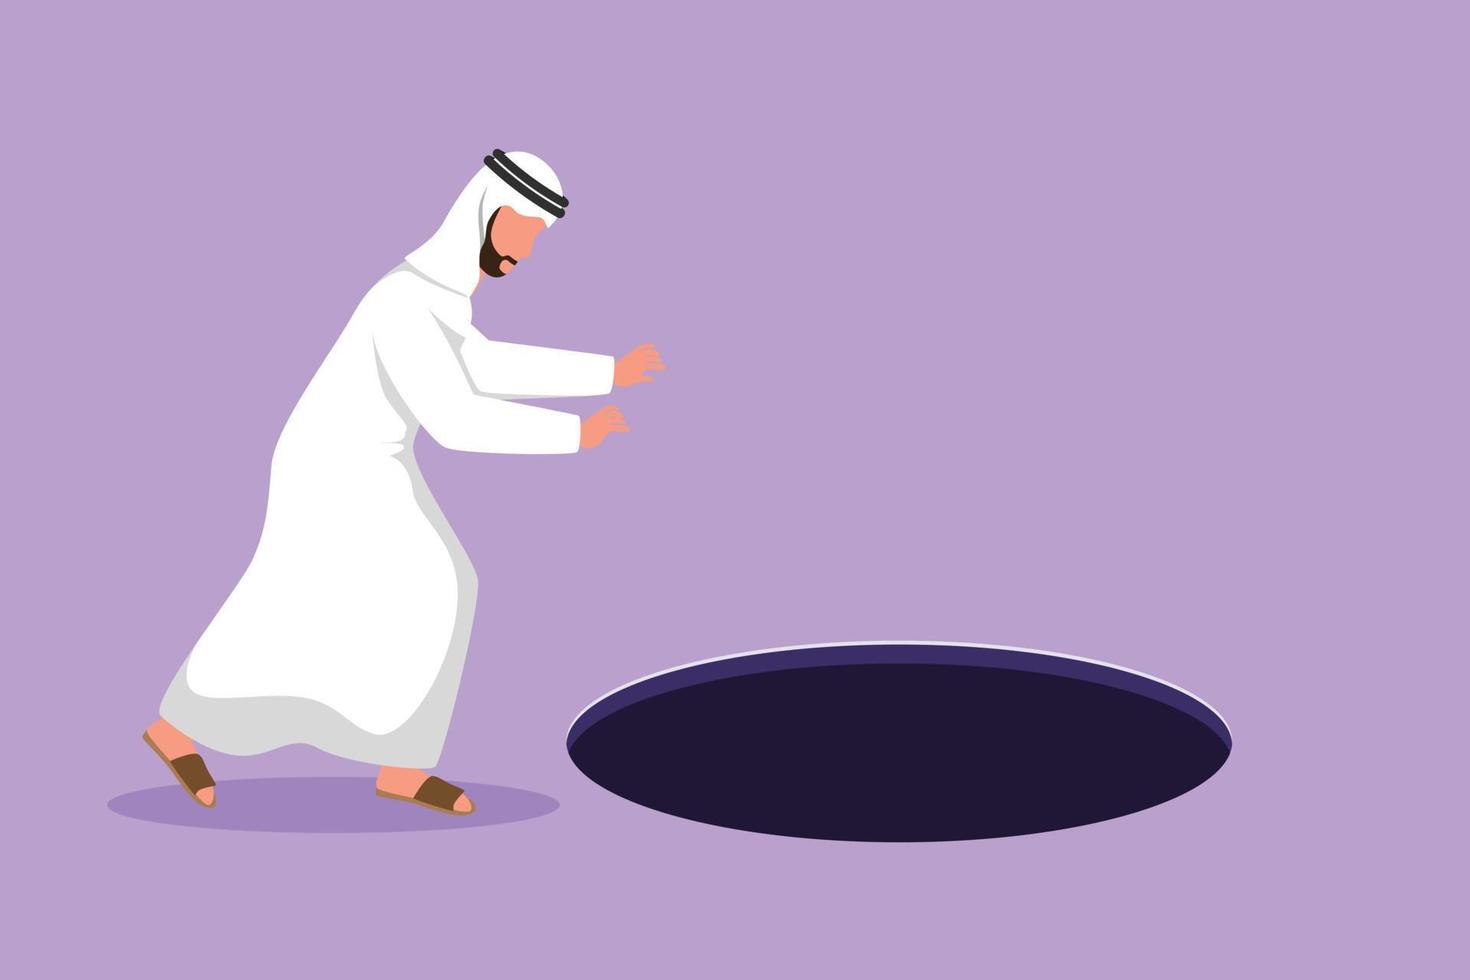 Character flat drawing Arab businessman looking at black hole. Manager wondering and looking at big hole, business concept in opportunity, exploration or challenge. Cartoon design vector illustration